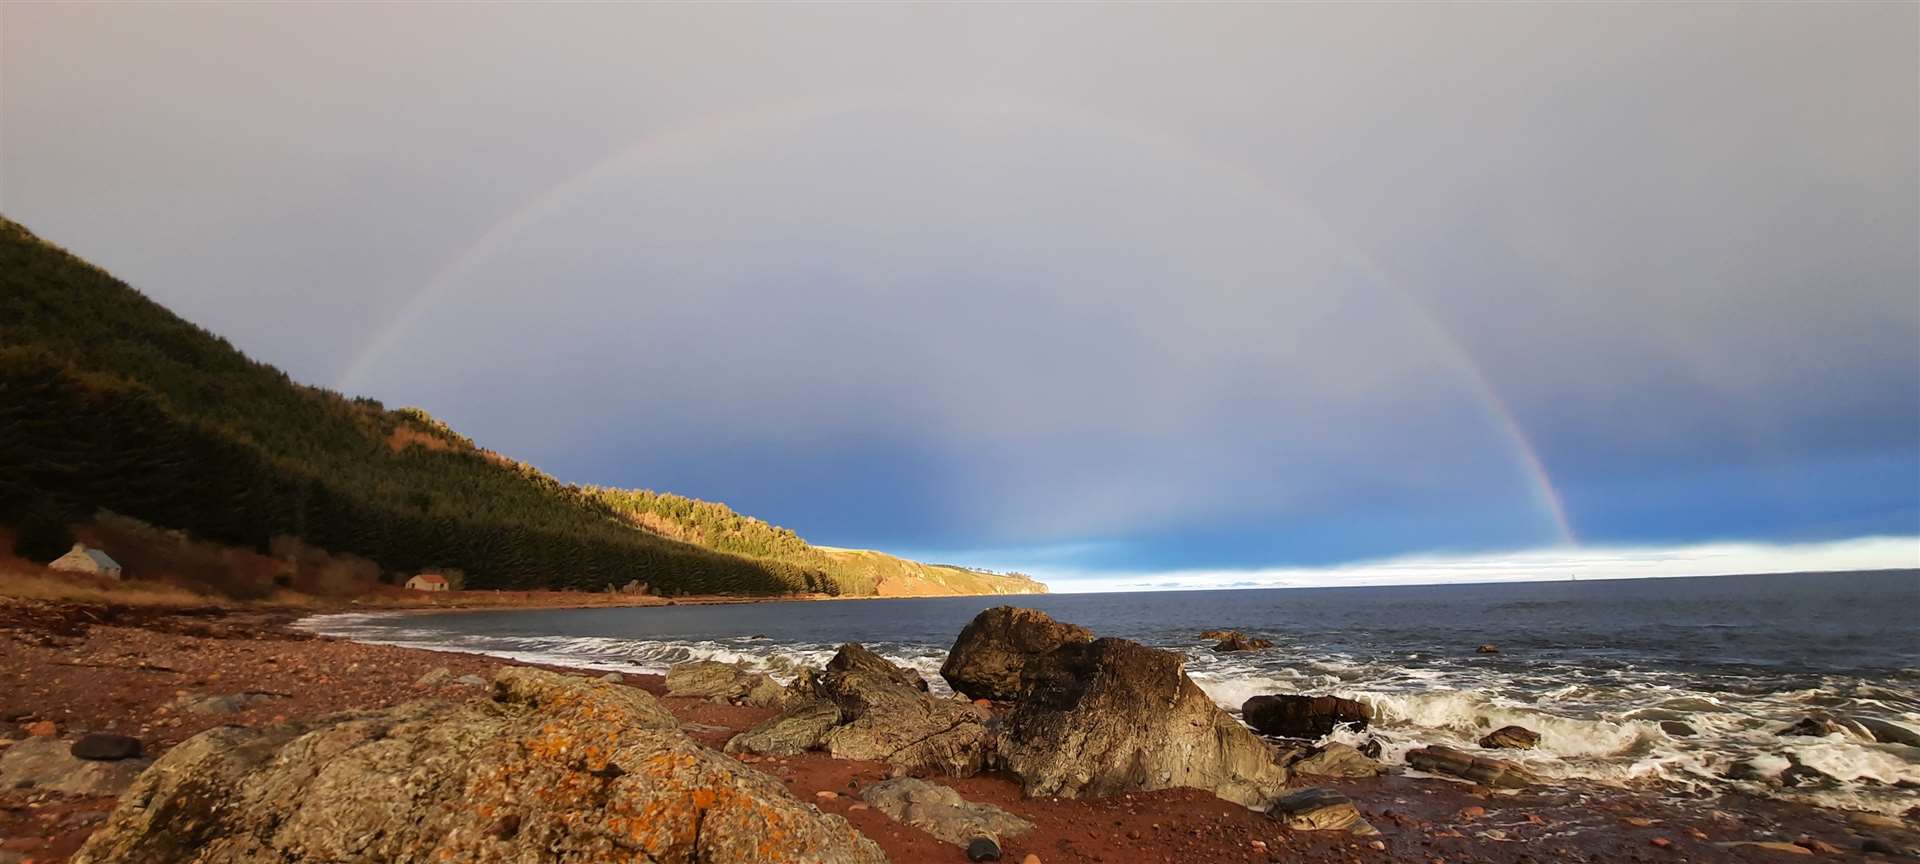 A rainbow frames the view from Eathie Haven.